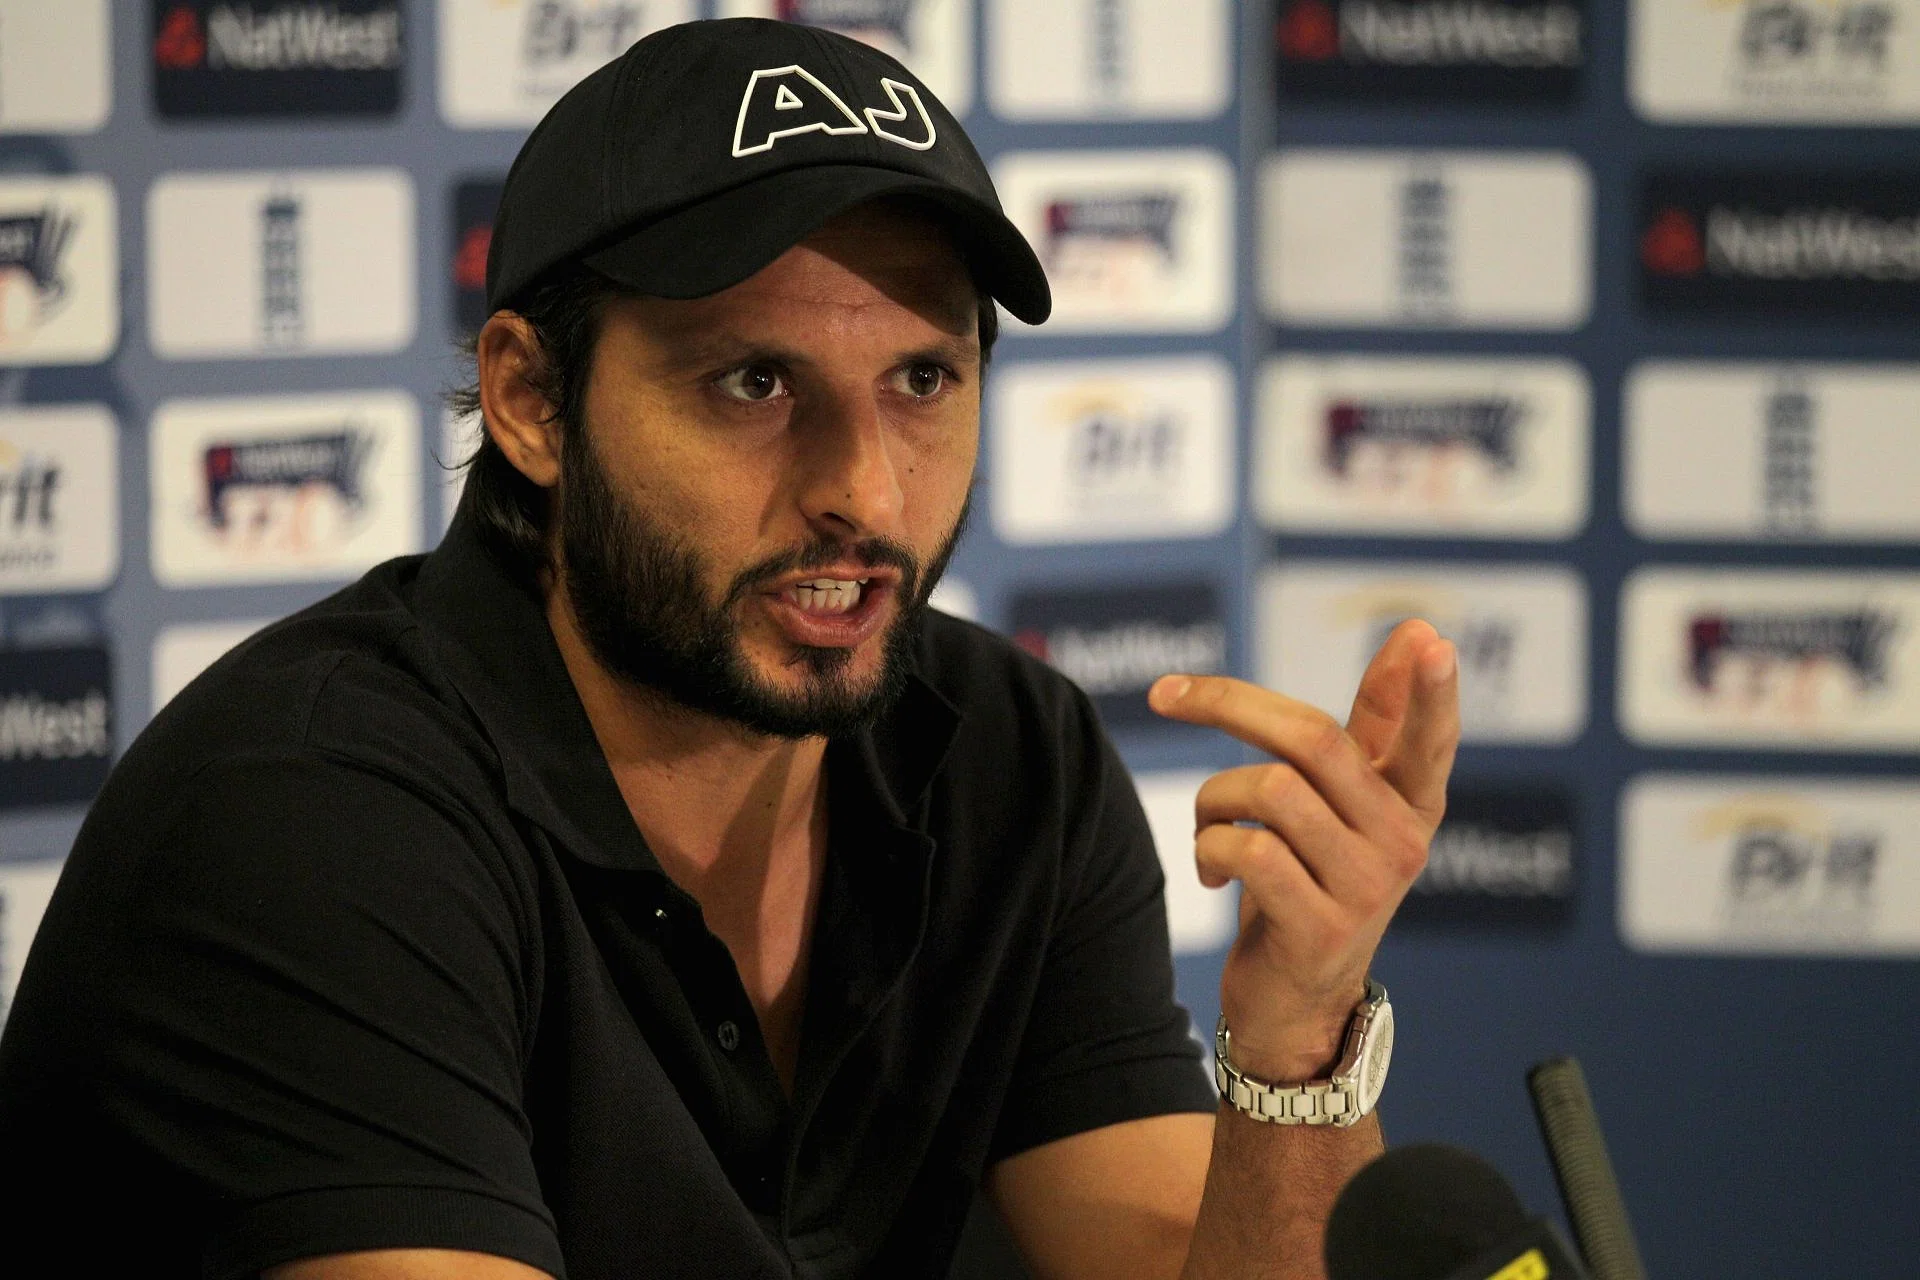 There Should Not Be Too Many Changes Before World Cup, Says Shahid Afridi